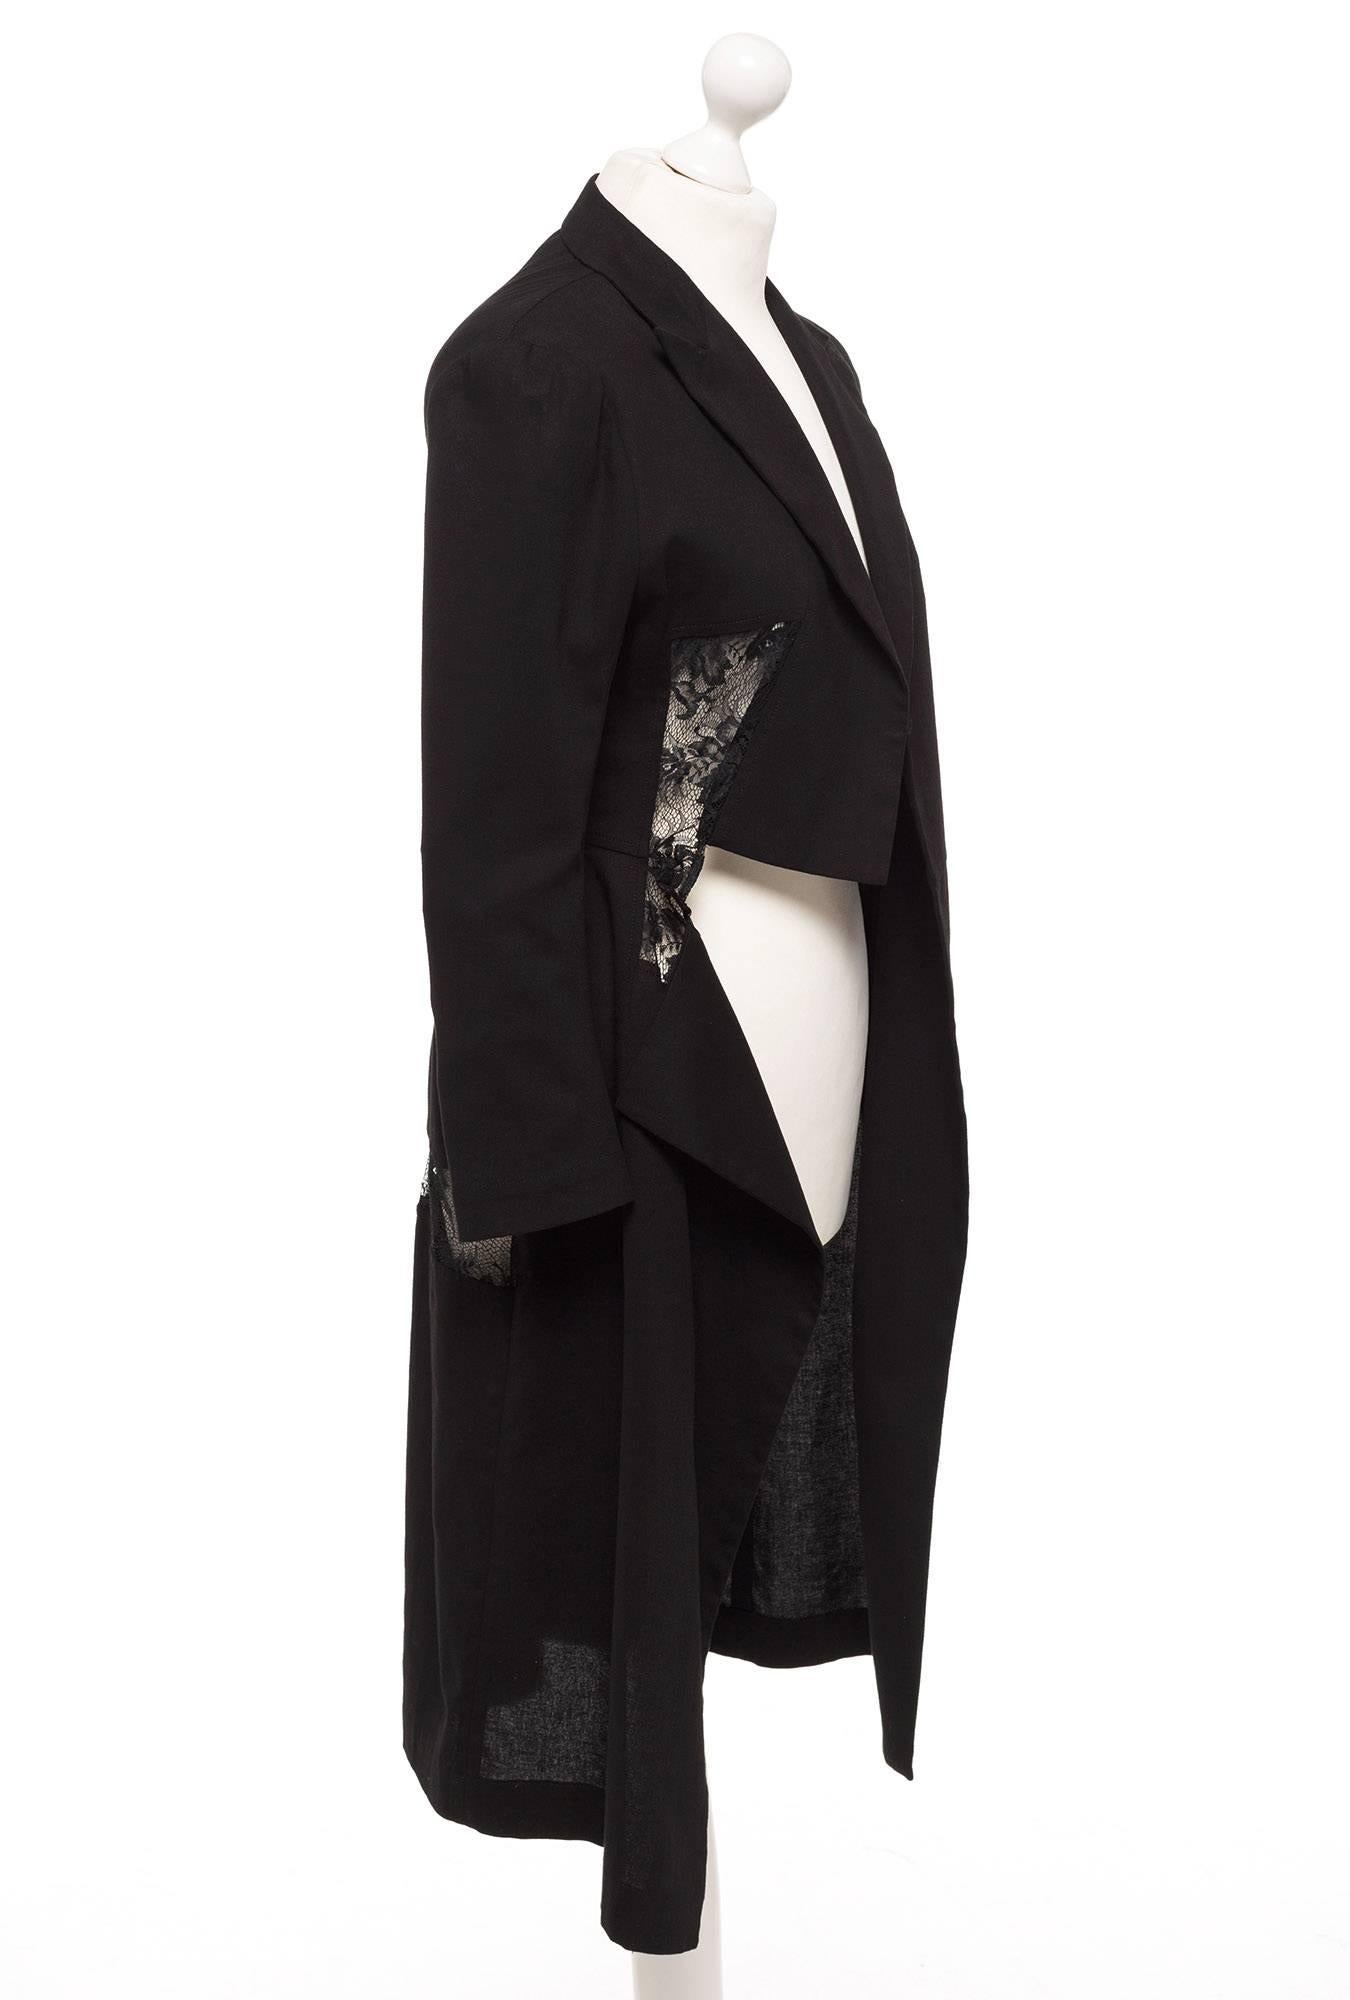  Blazer can function as a dress or long blazer but there are no buttons for closure, 3/4 sleeves, lace front and back details, notch collar, and hanging front panels. A master piece from our favorite designer Yohji Yamamoto. This is from the